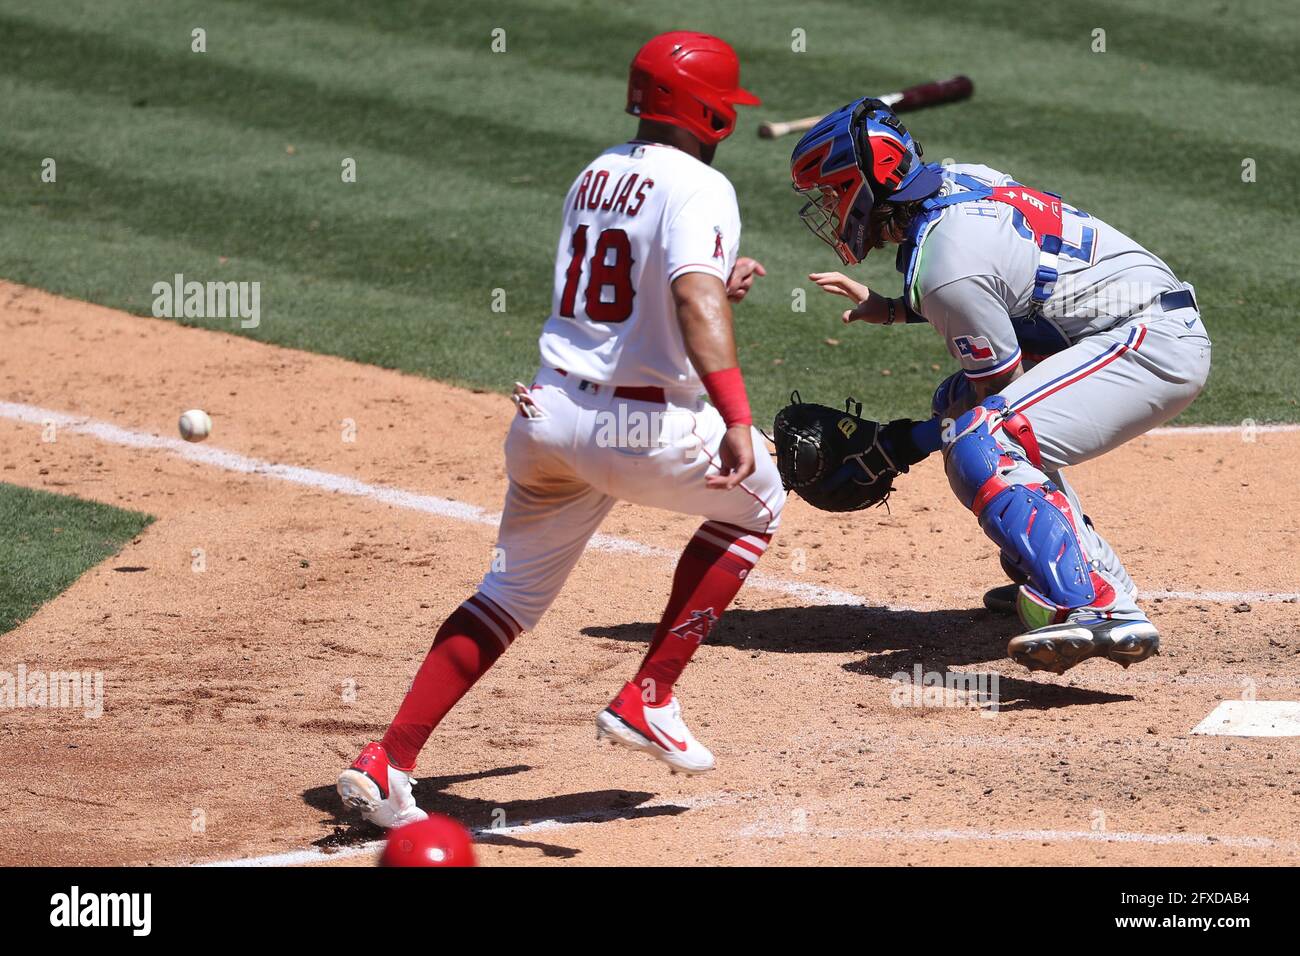 May 26, 2021: Los Angeles Angels third baseman Jose Rojas (18) beats the throw to Texas Rangers catcher Jonah Heim (28) at home plate during the game between the Texas Rangers and the Los Angeles Angels of Anaheim at Angel Stadium in Anaheim, CA, (Photo by Peter Joneleit, Cal Sport Media) Stock Photo